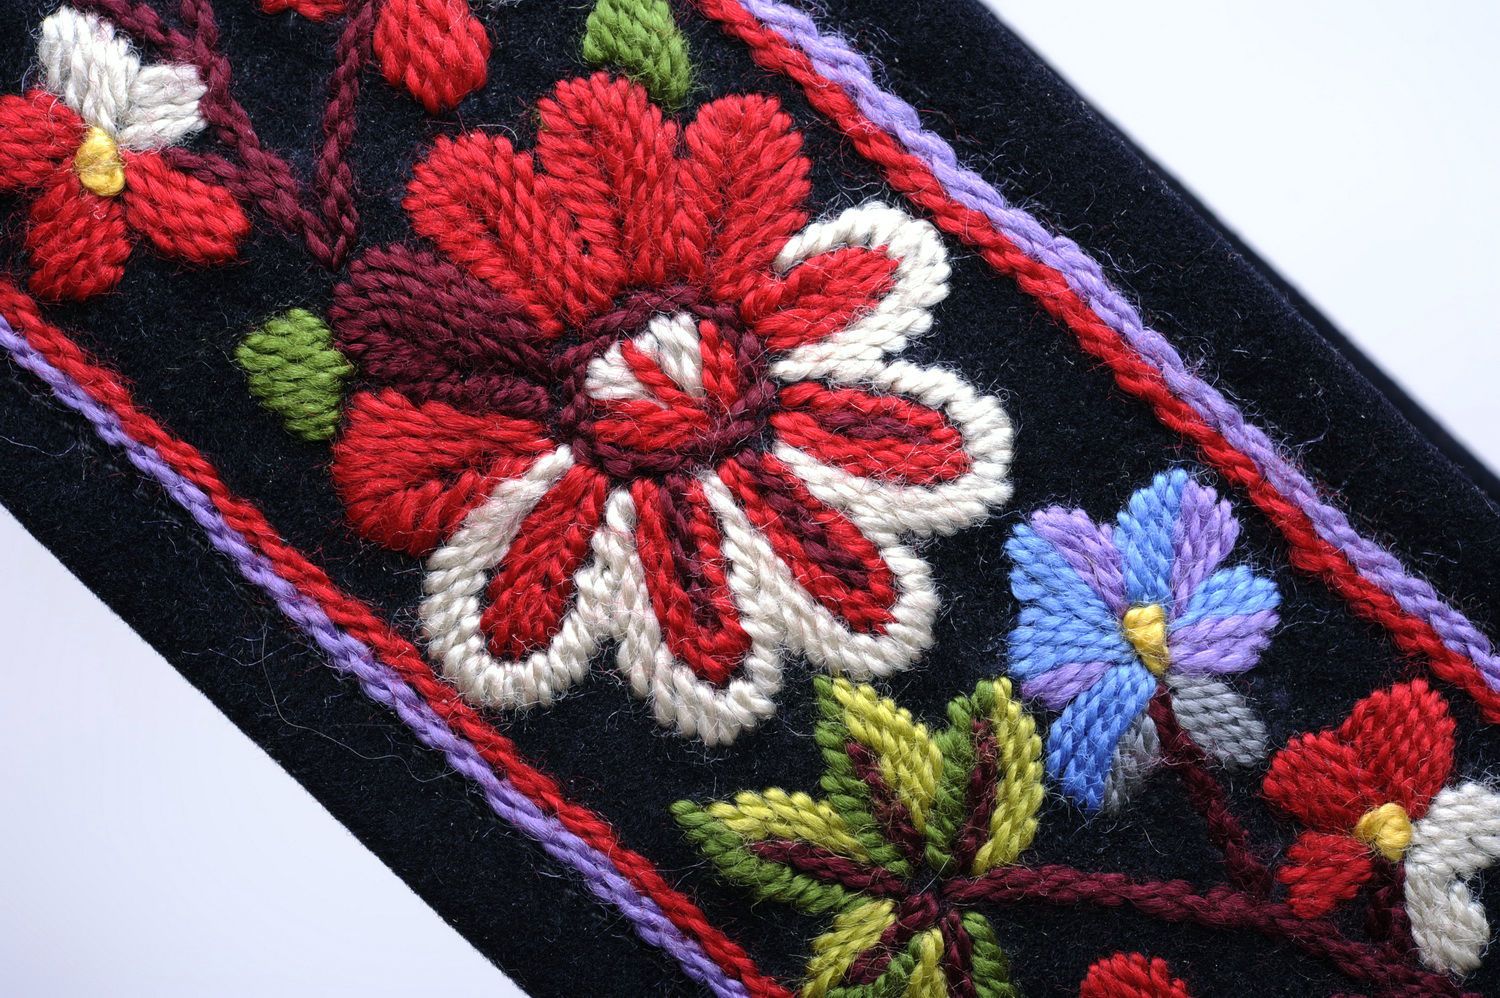 Velvet belt with embroidery photo 3